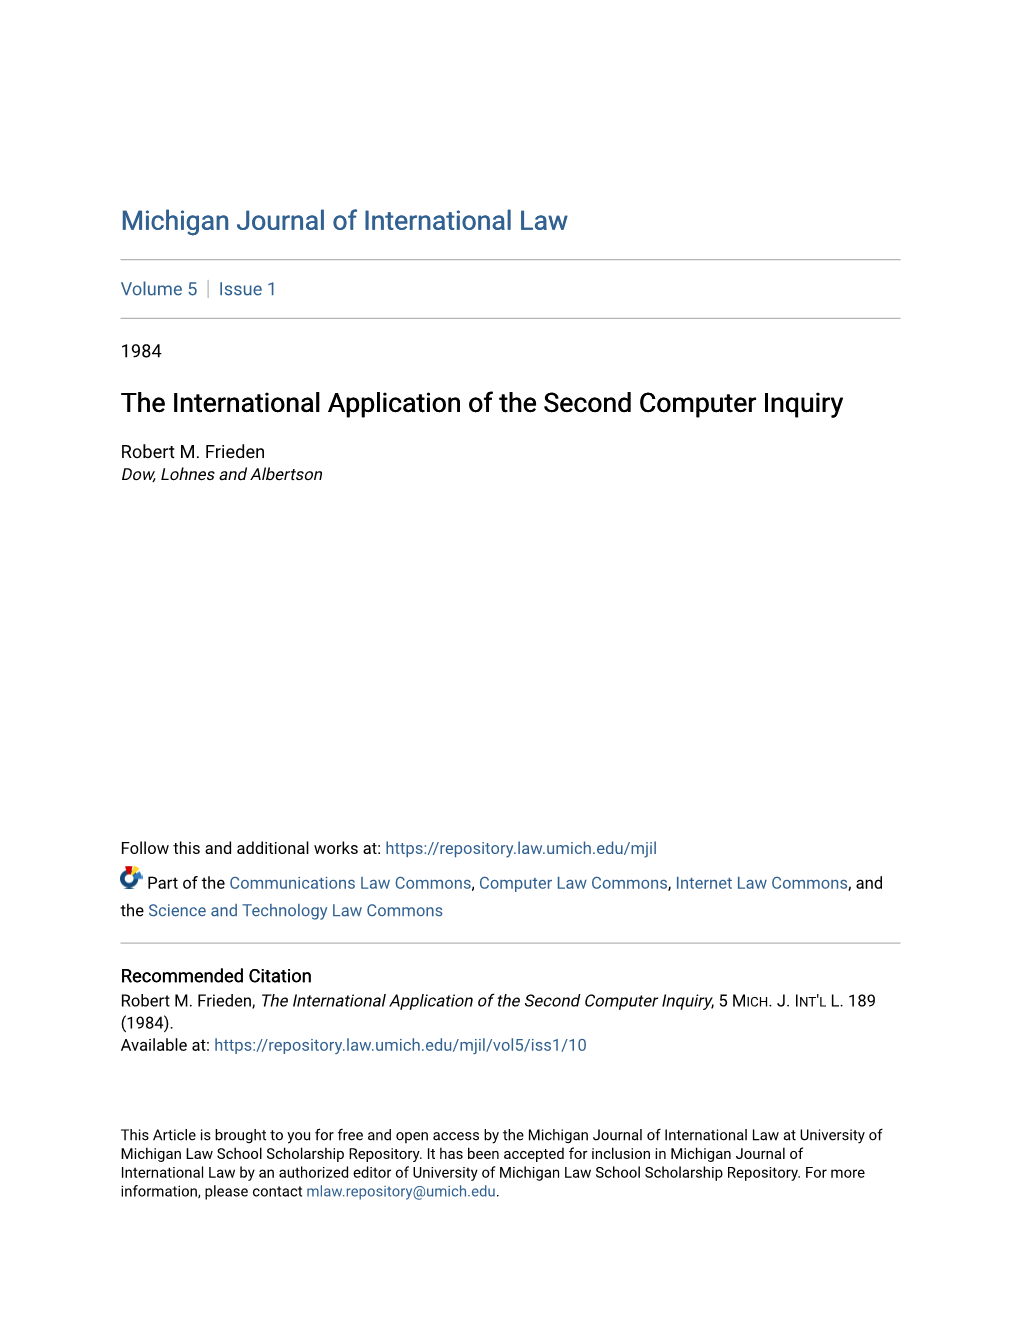 The International Application of the Second Computer Inquiry